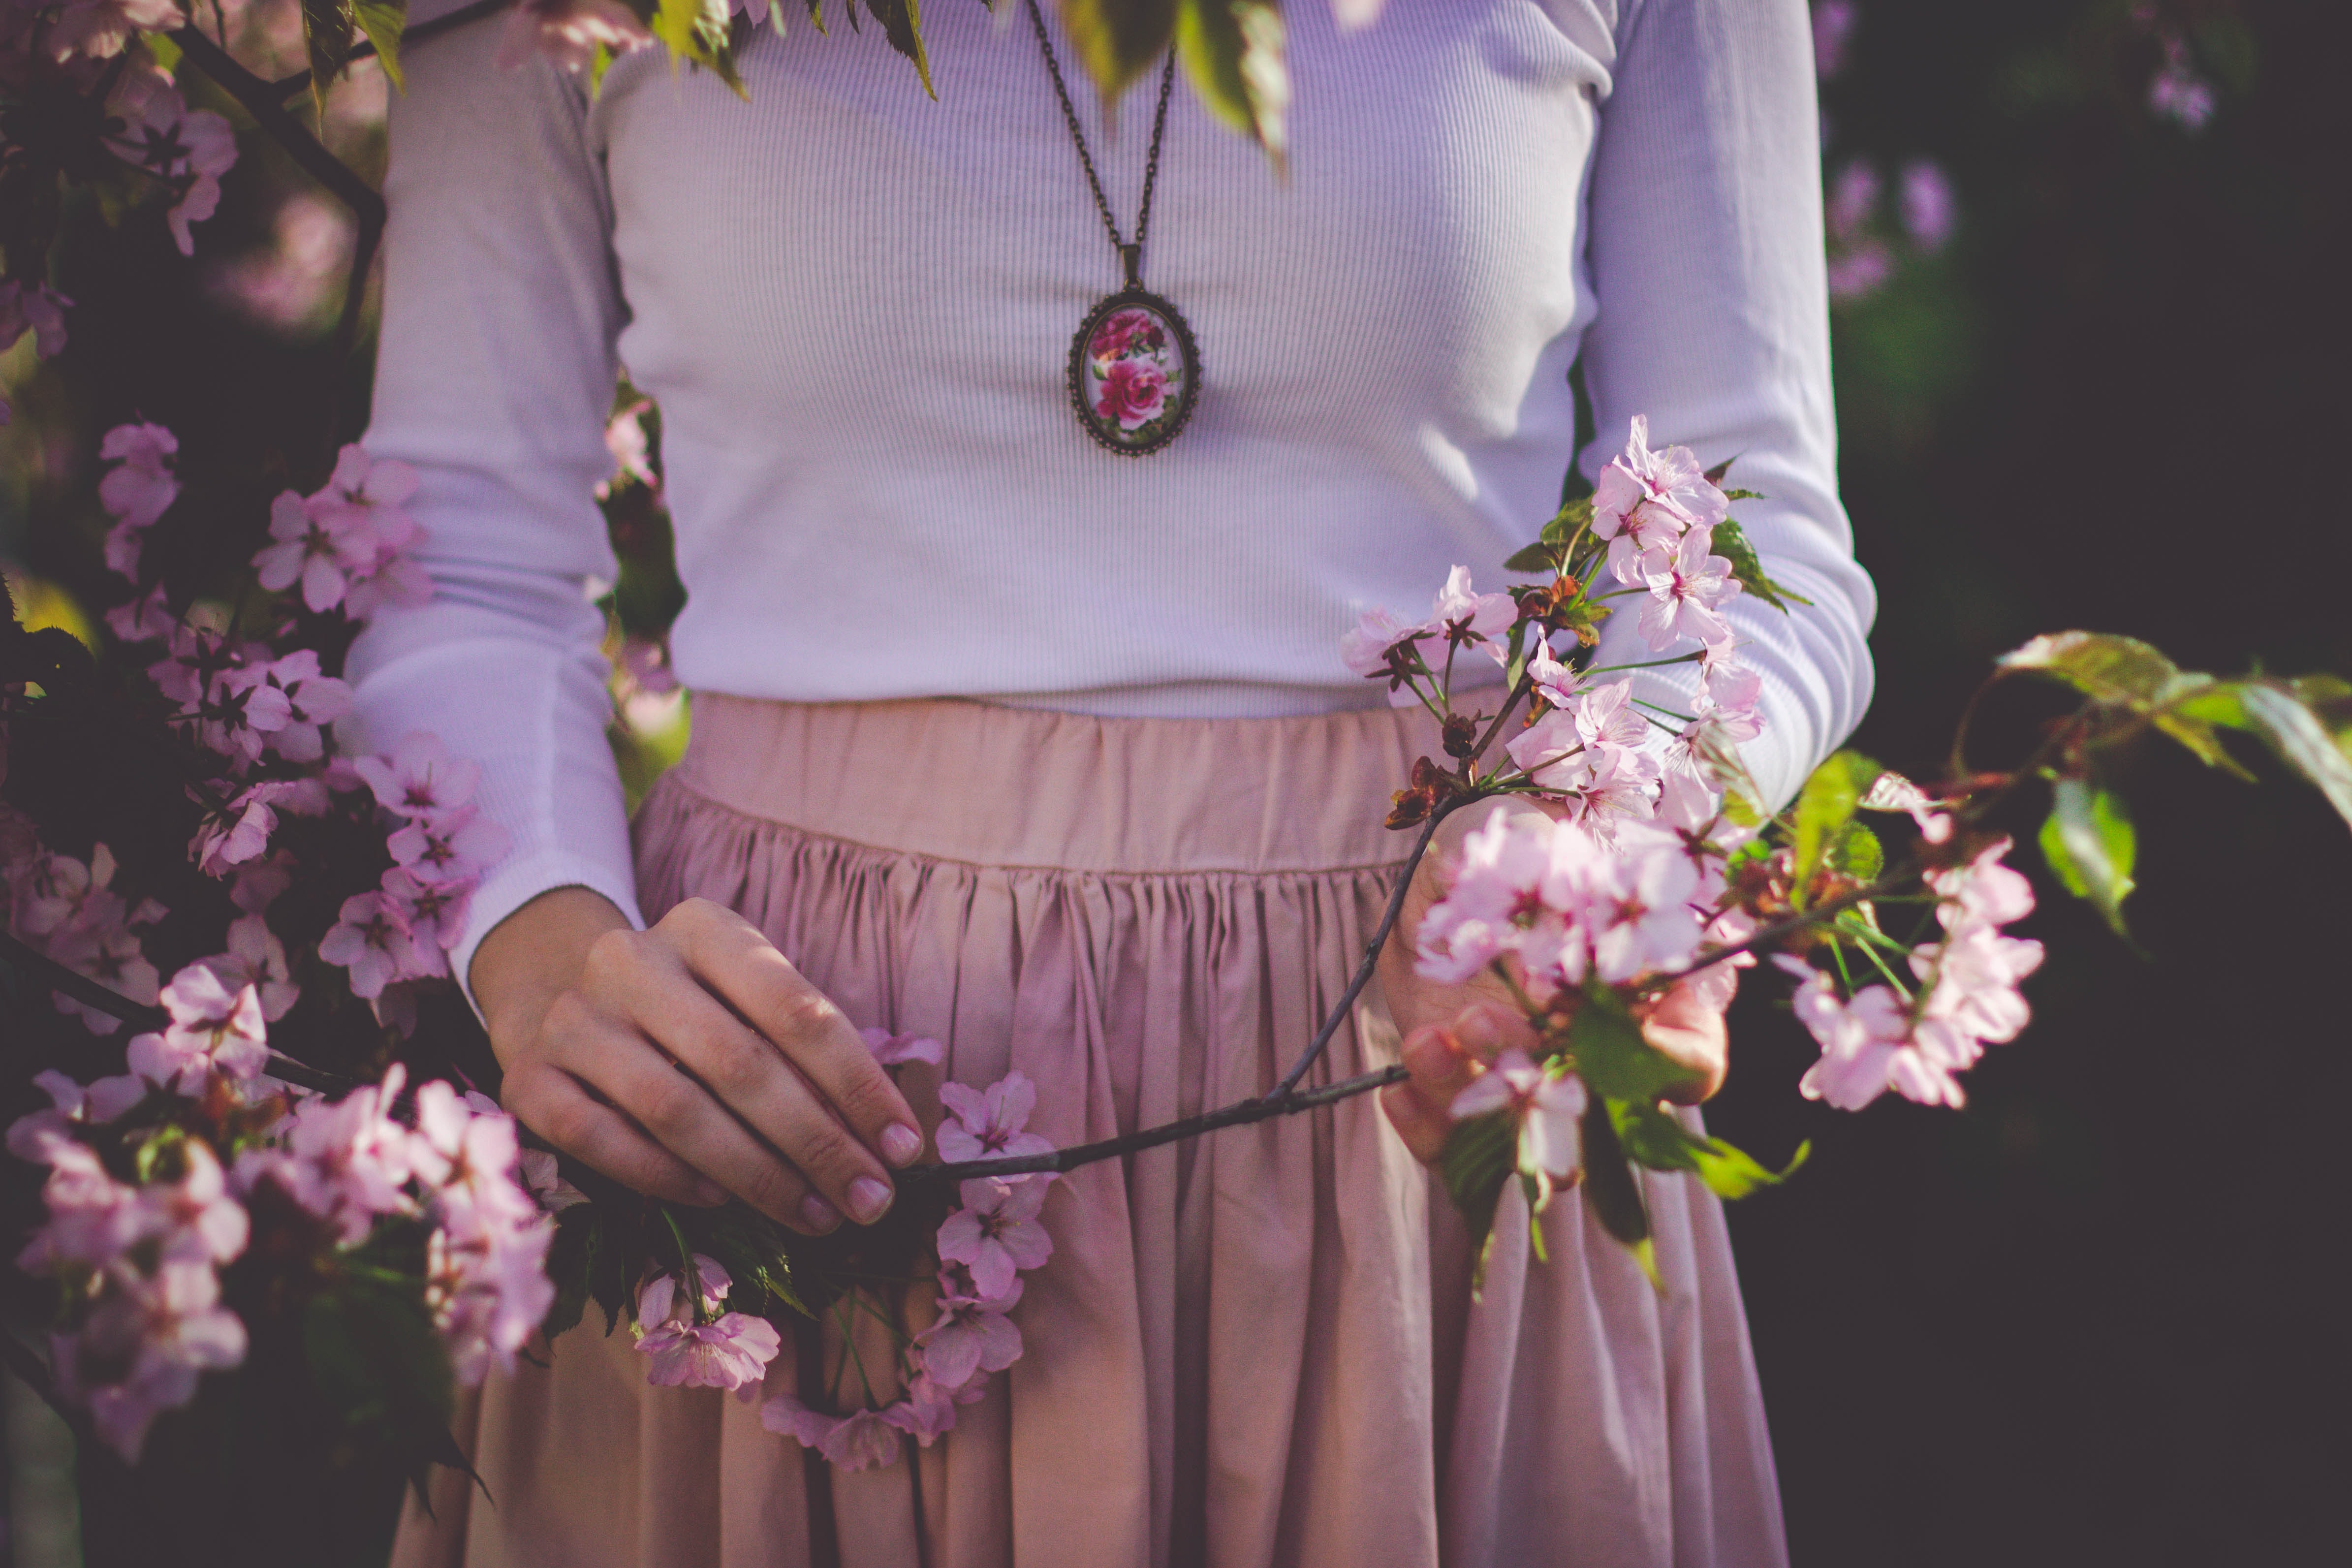 Woman wearing white long sleeve shirt and beige skirt holding pink petaled flower photo